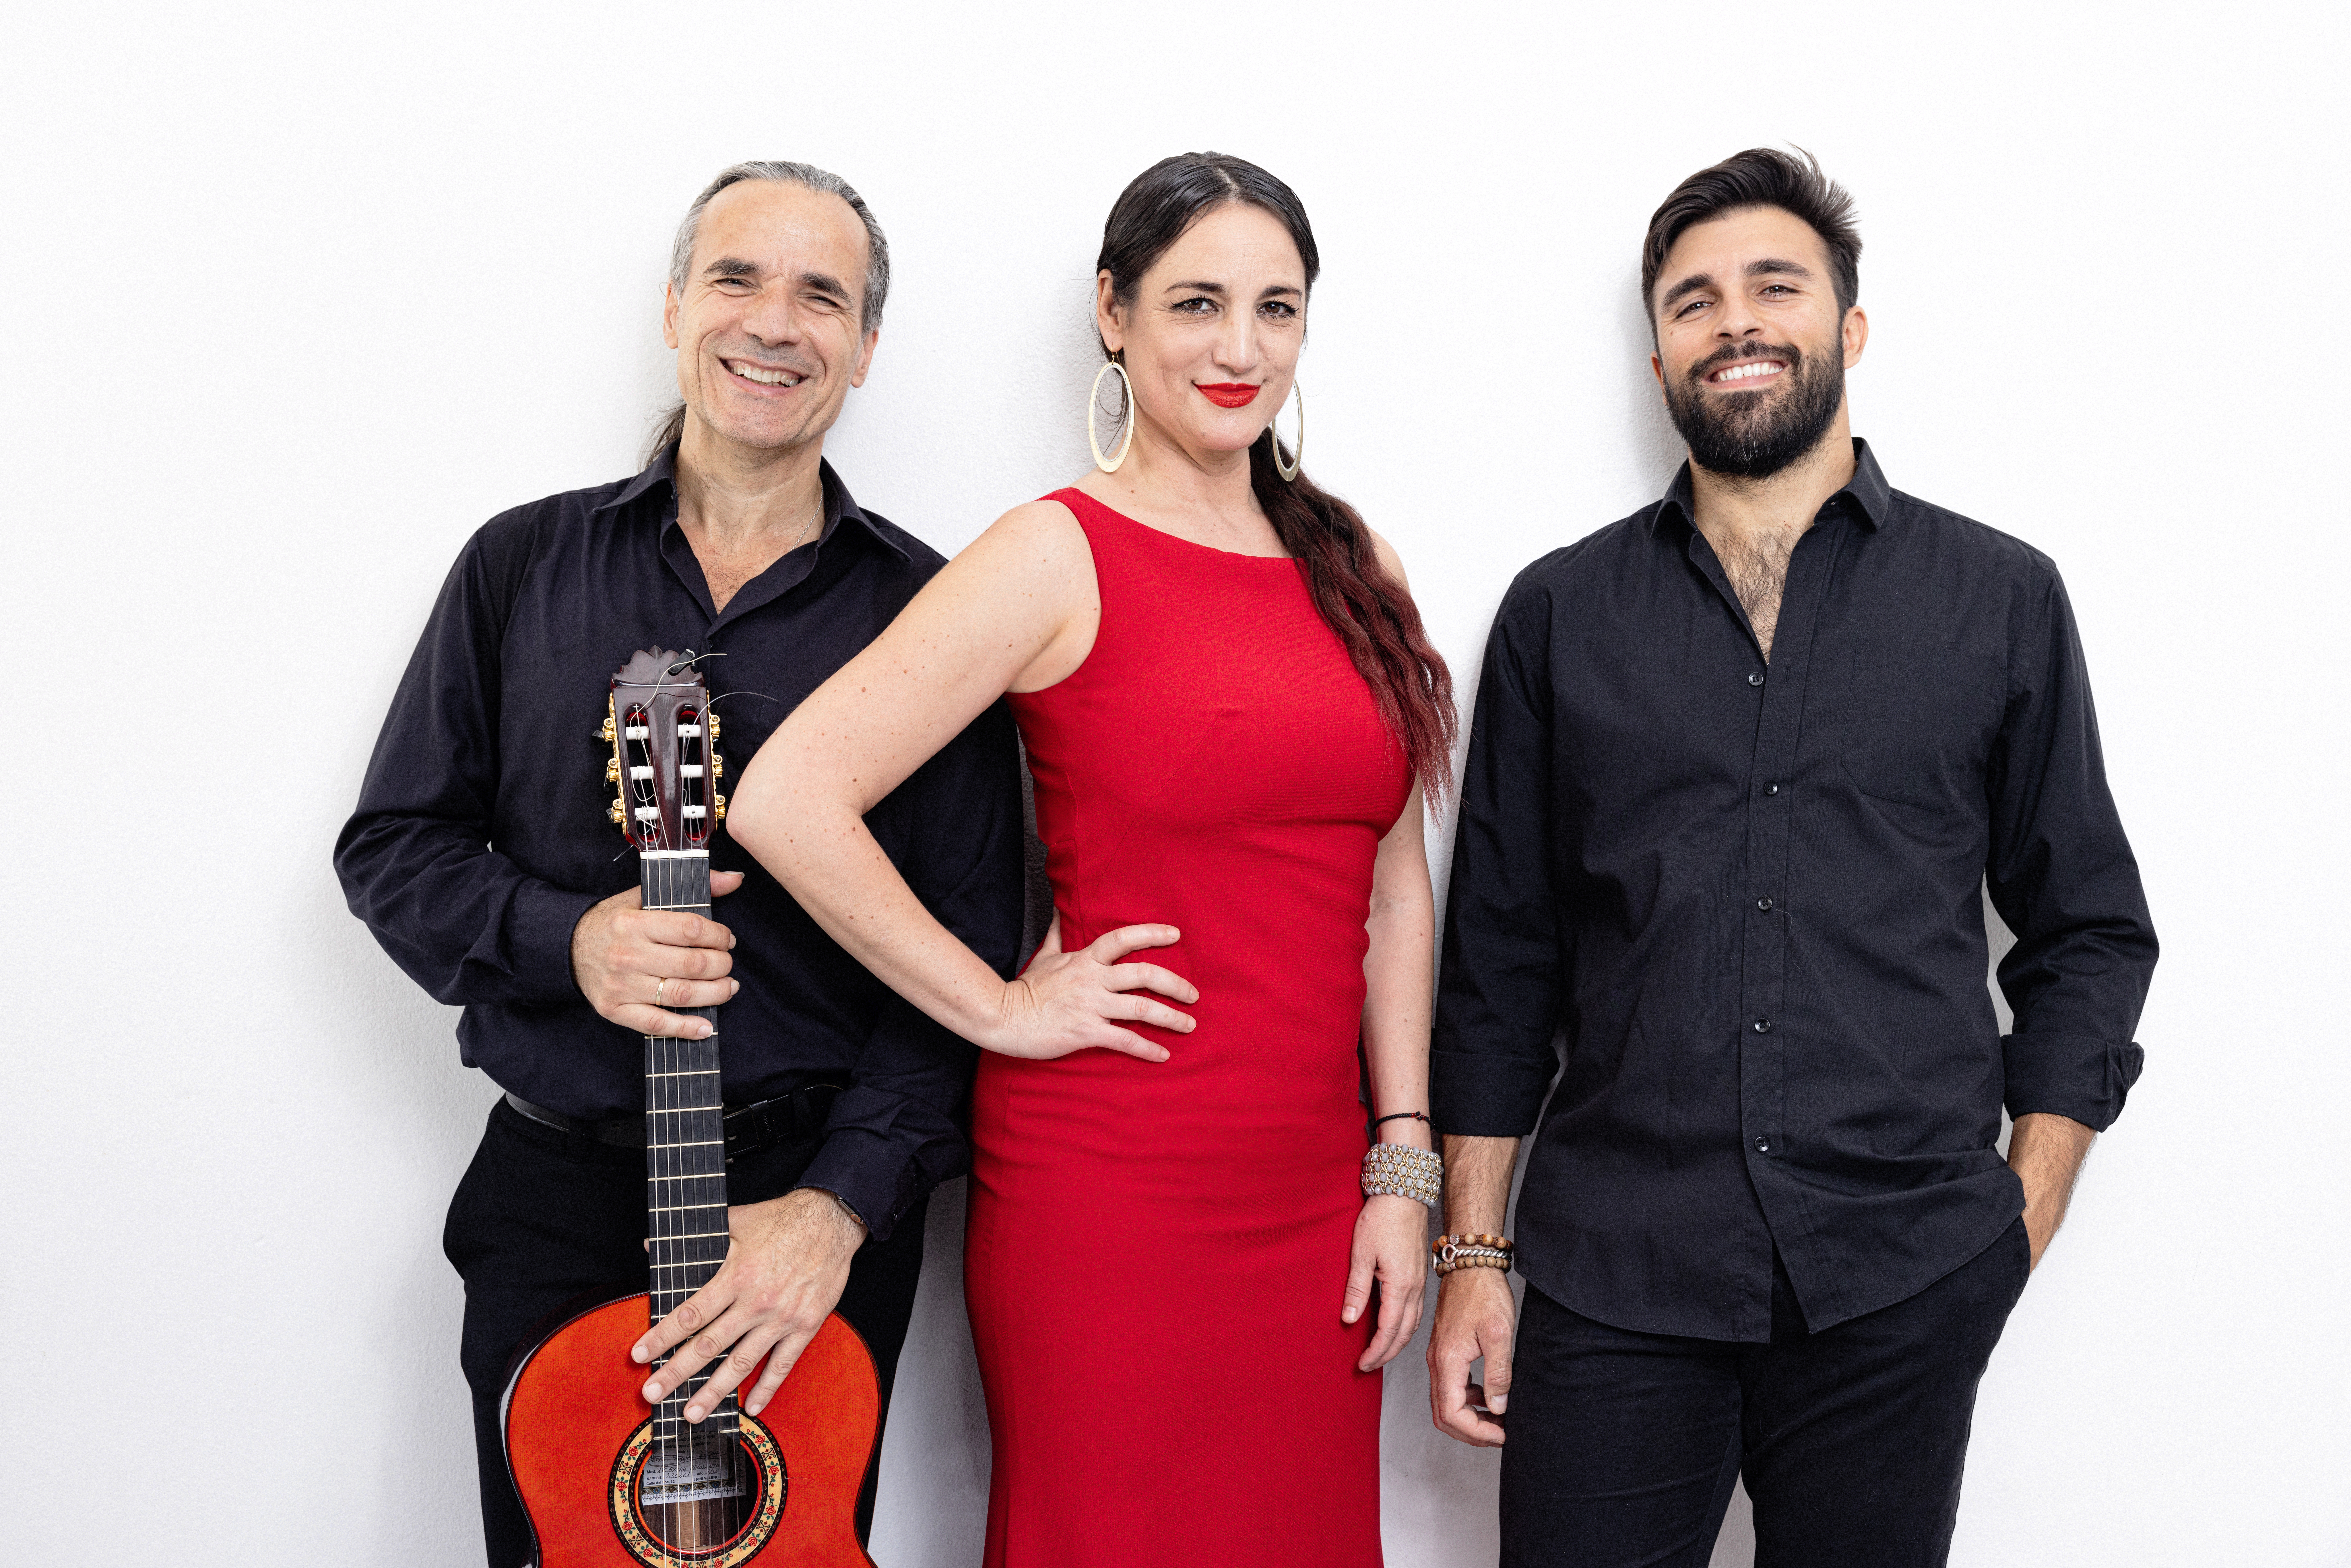 Flamenco meets oper and chamber music